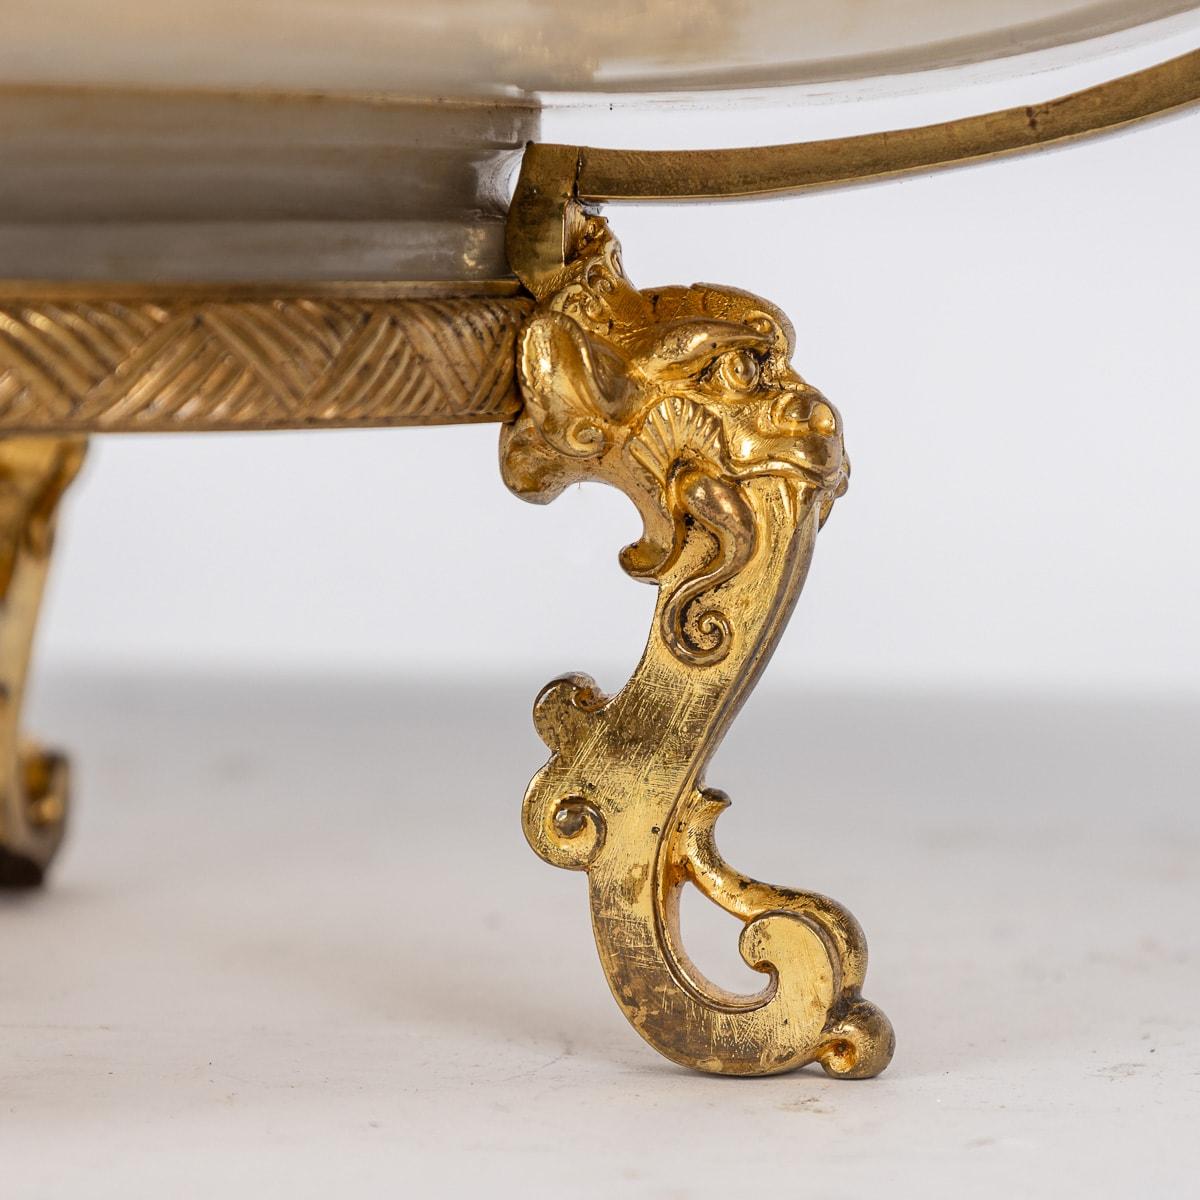 19th Century French Ormolu Mounted Onyx Marble & Enamel Centrepiece c.1880 For Sale 13